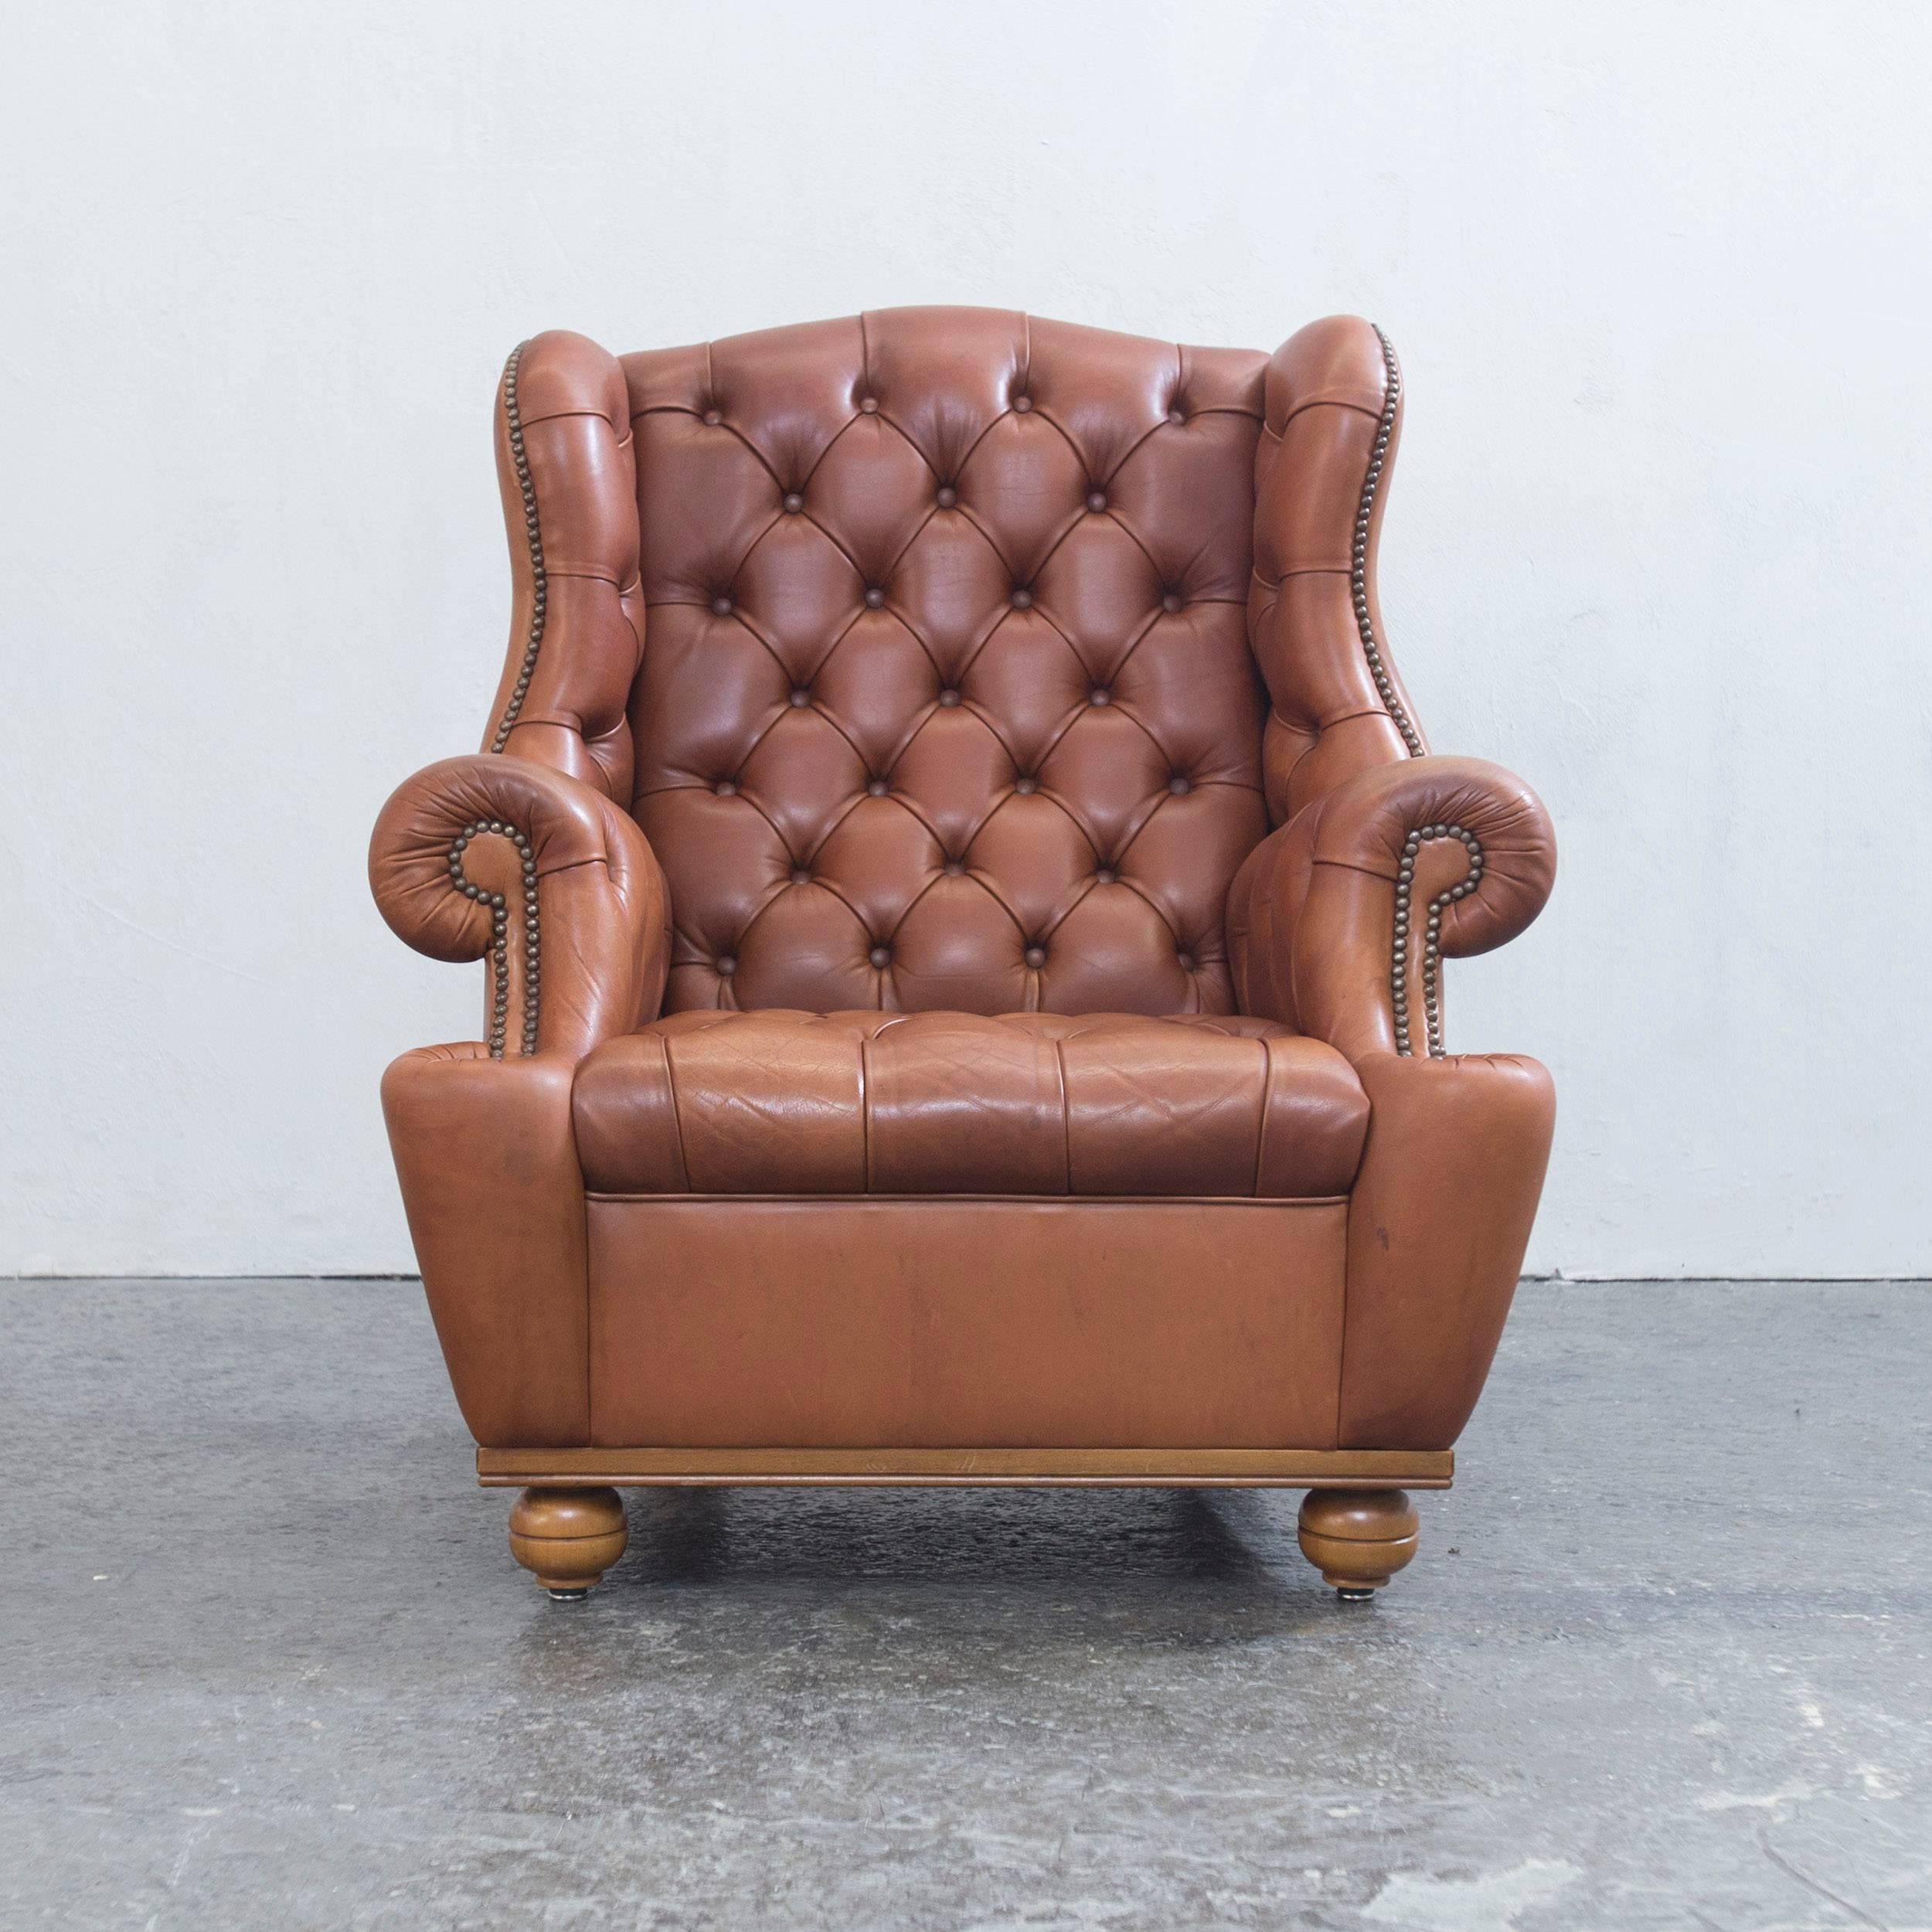 Brown colored original Chesterfield leather wingback chair in a vintage design, made for pure comfort and elegance.